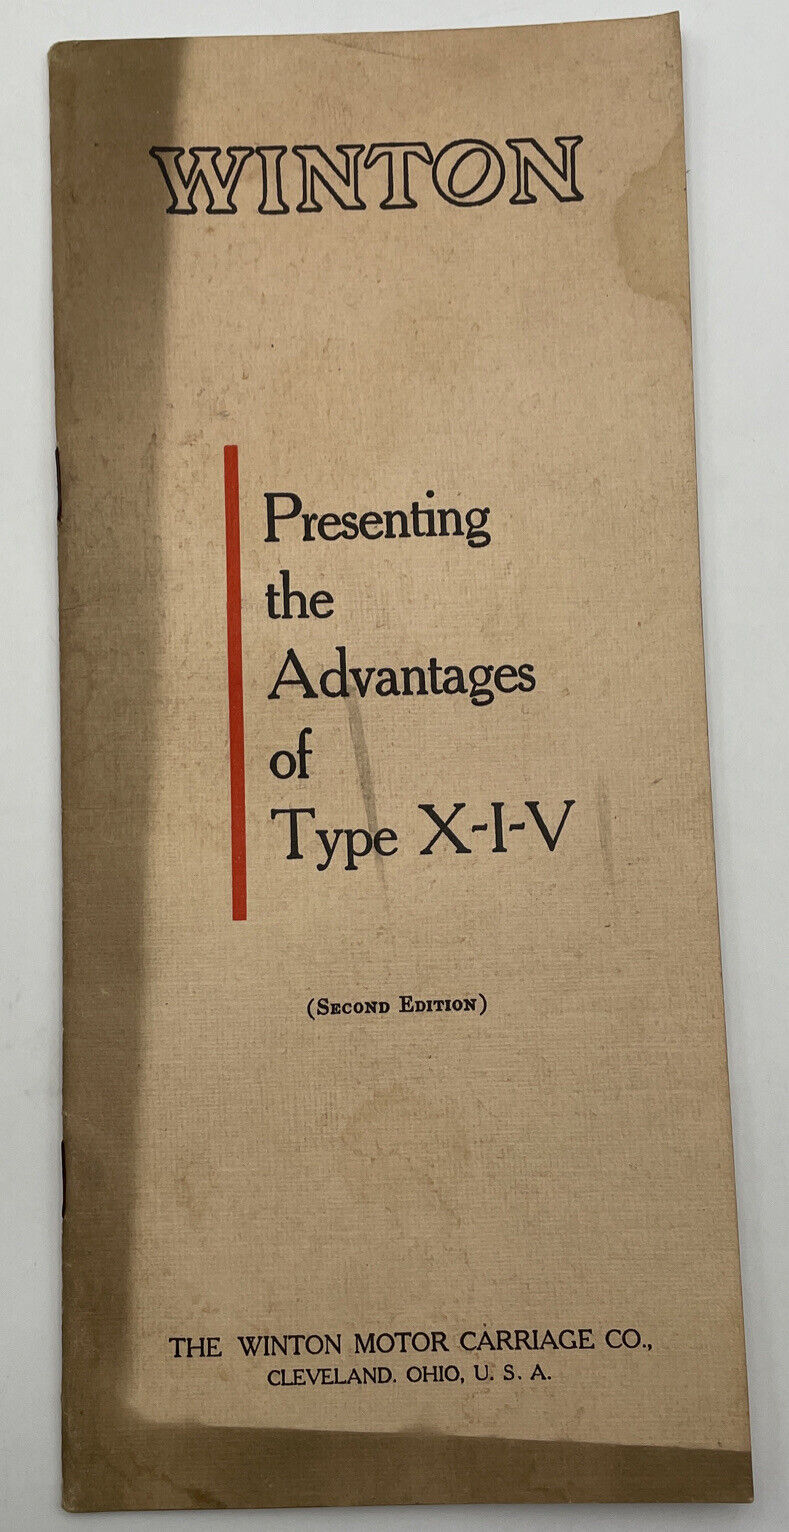 Winton Presenting The Advantages Of Type X-I-V Auto Car Brochure Booklet